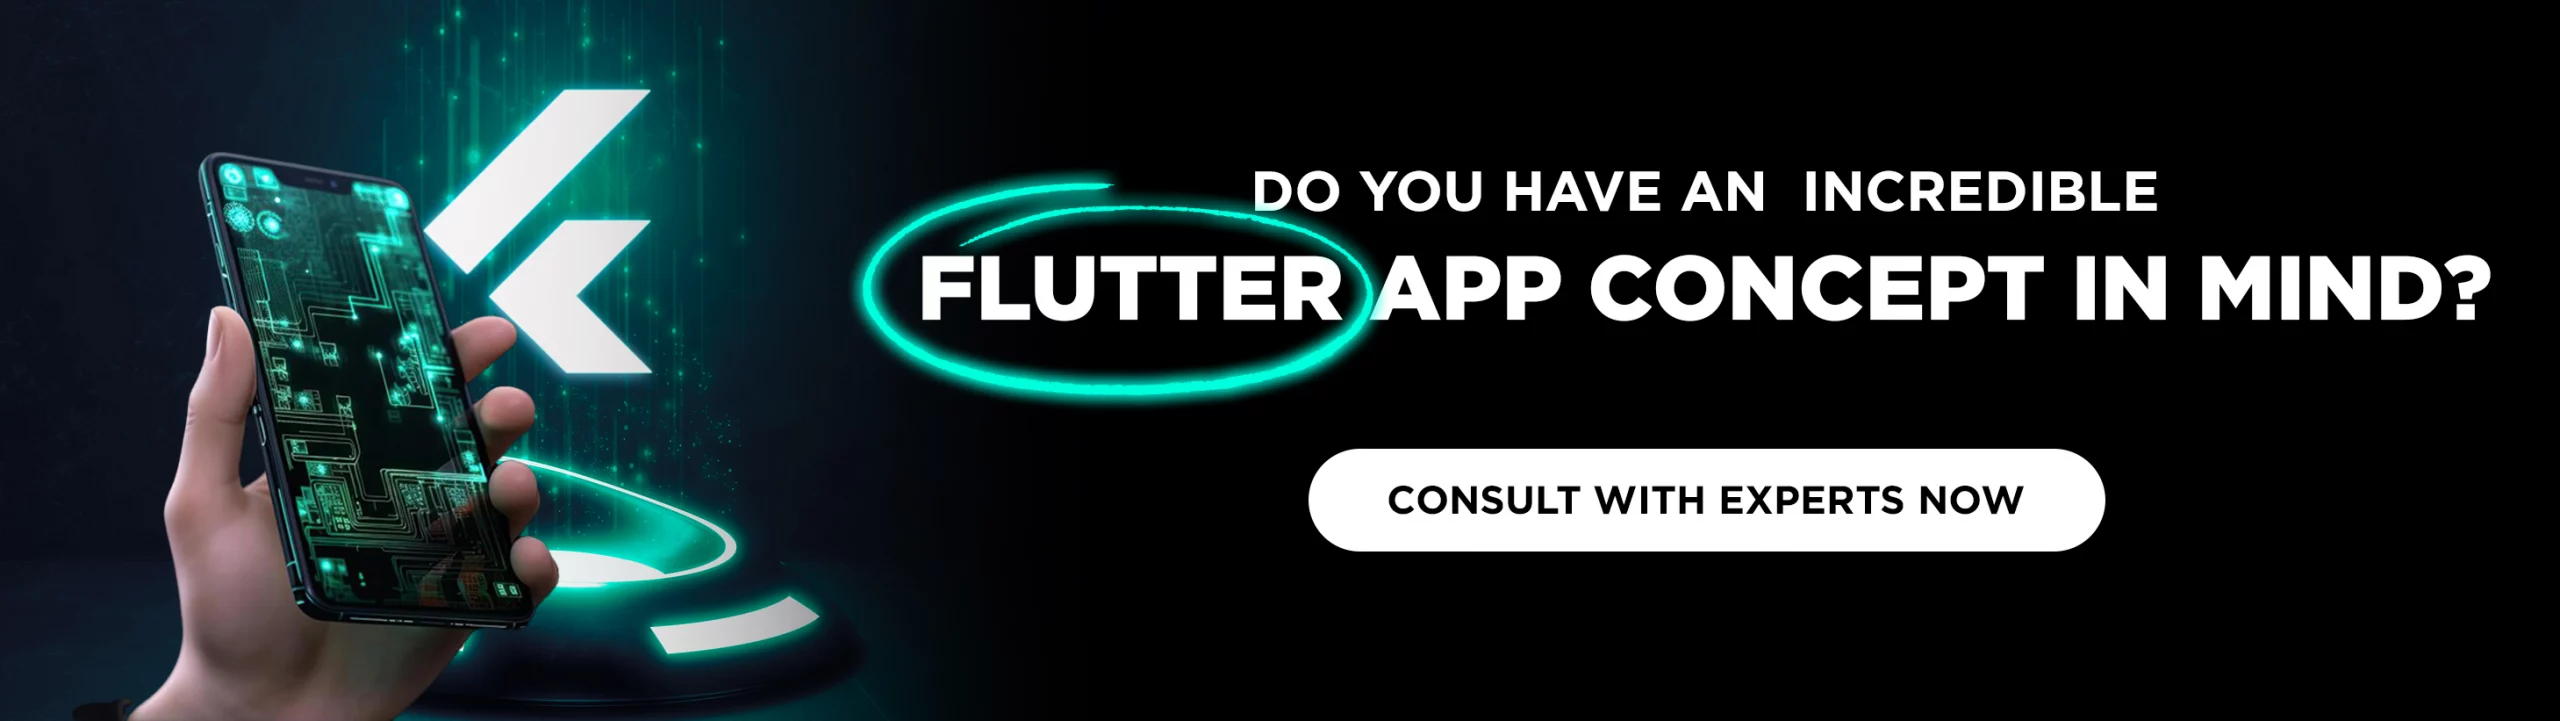 Discuss Your Flutter App Concept With Experts